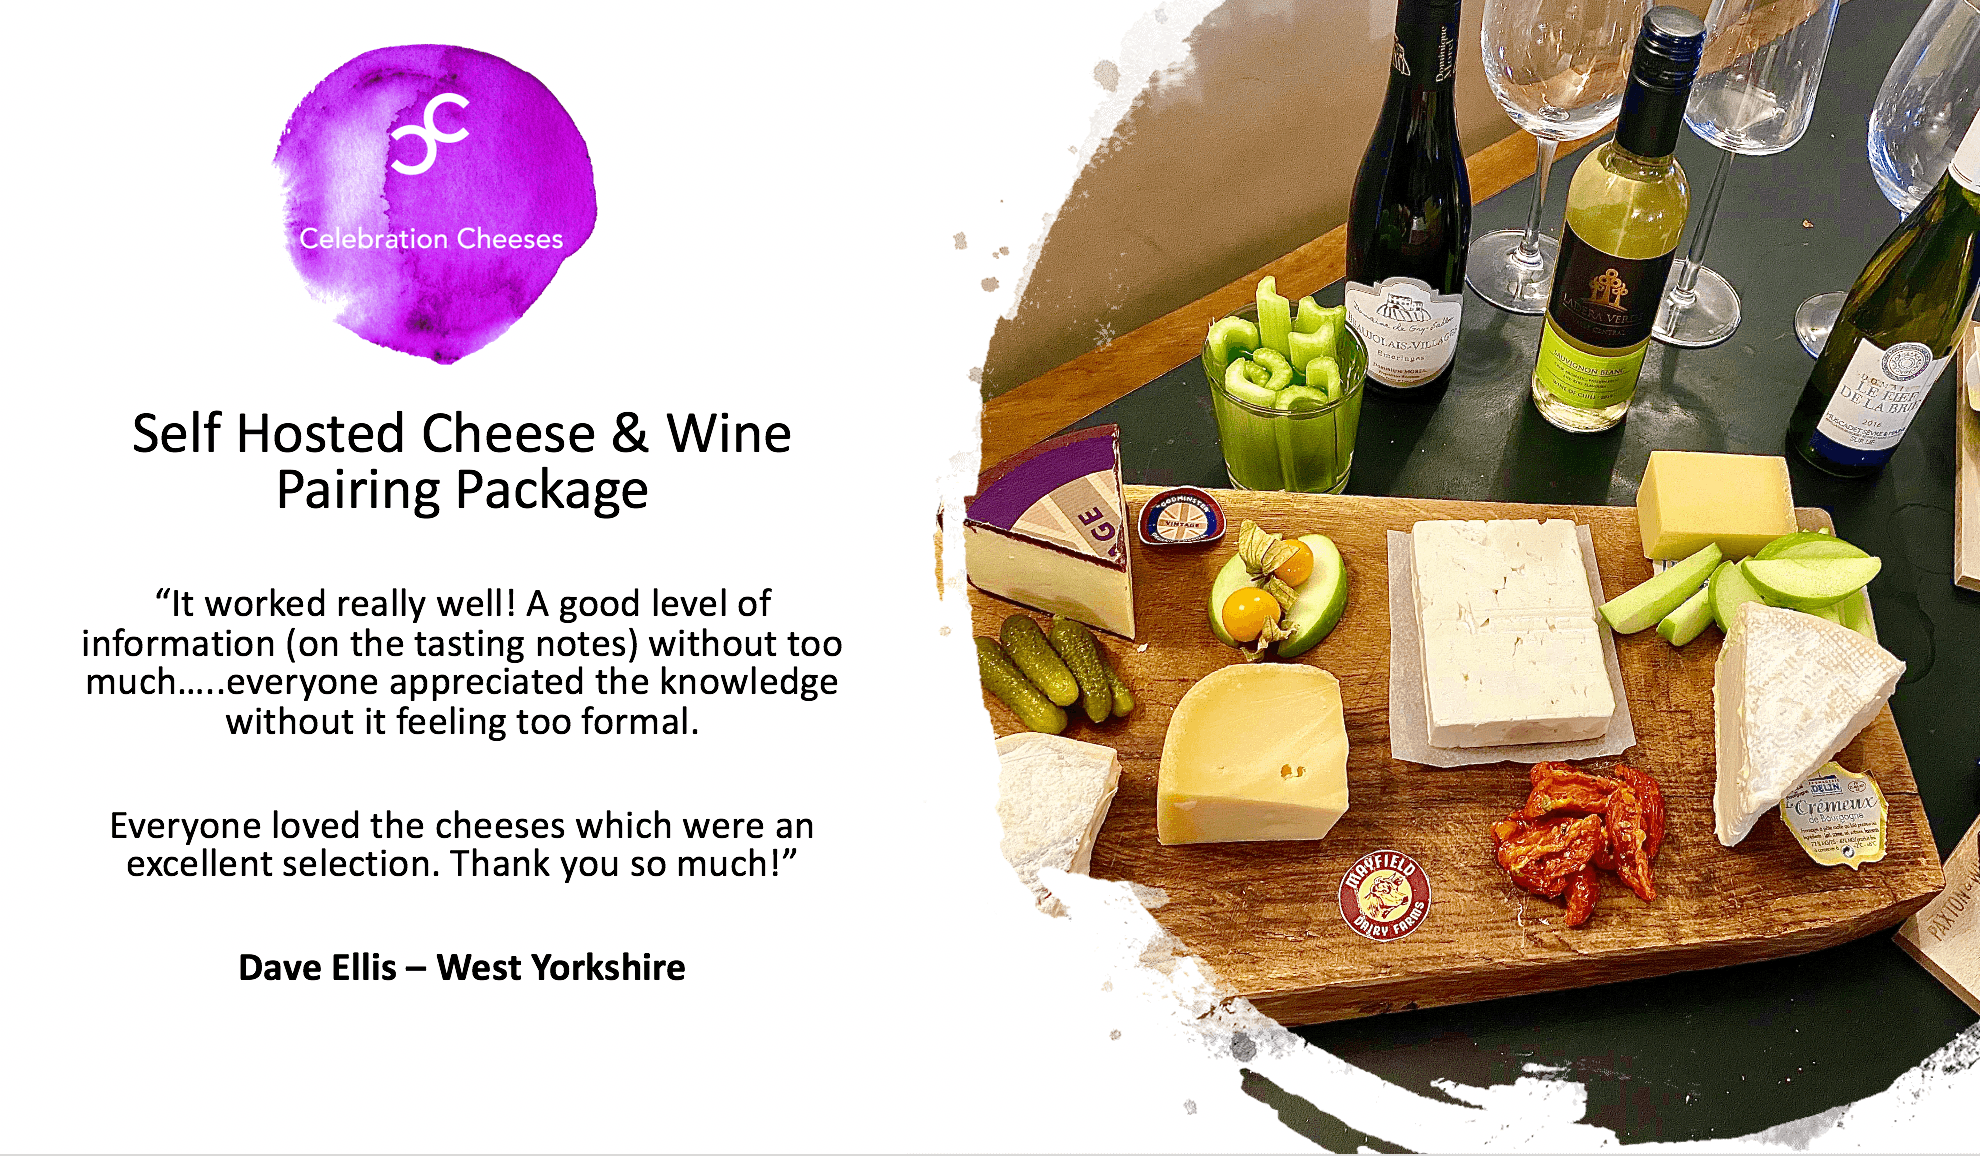 Self Hosted Cheese & Wine Pairing Experience - Gold (priced per person) - Celebration Cheeses